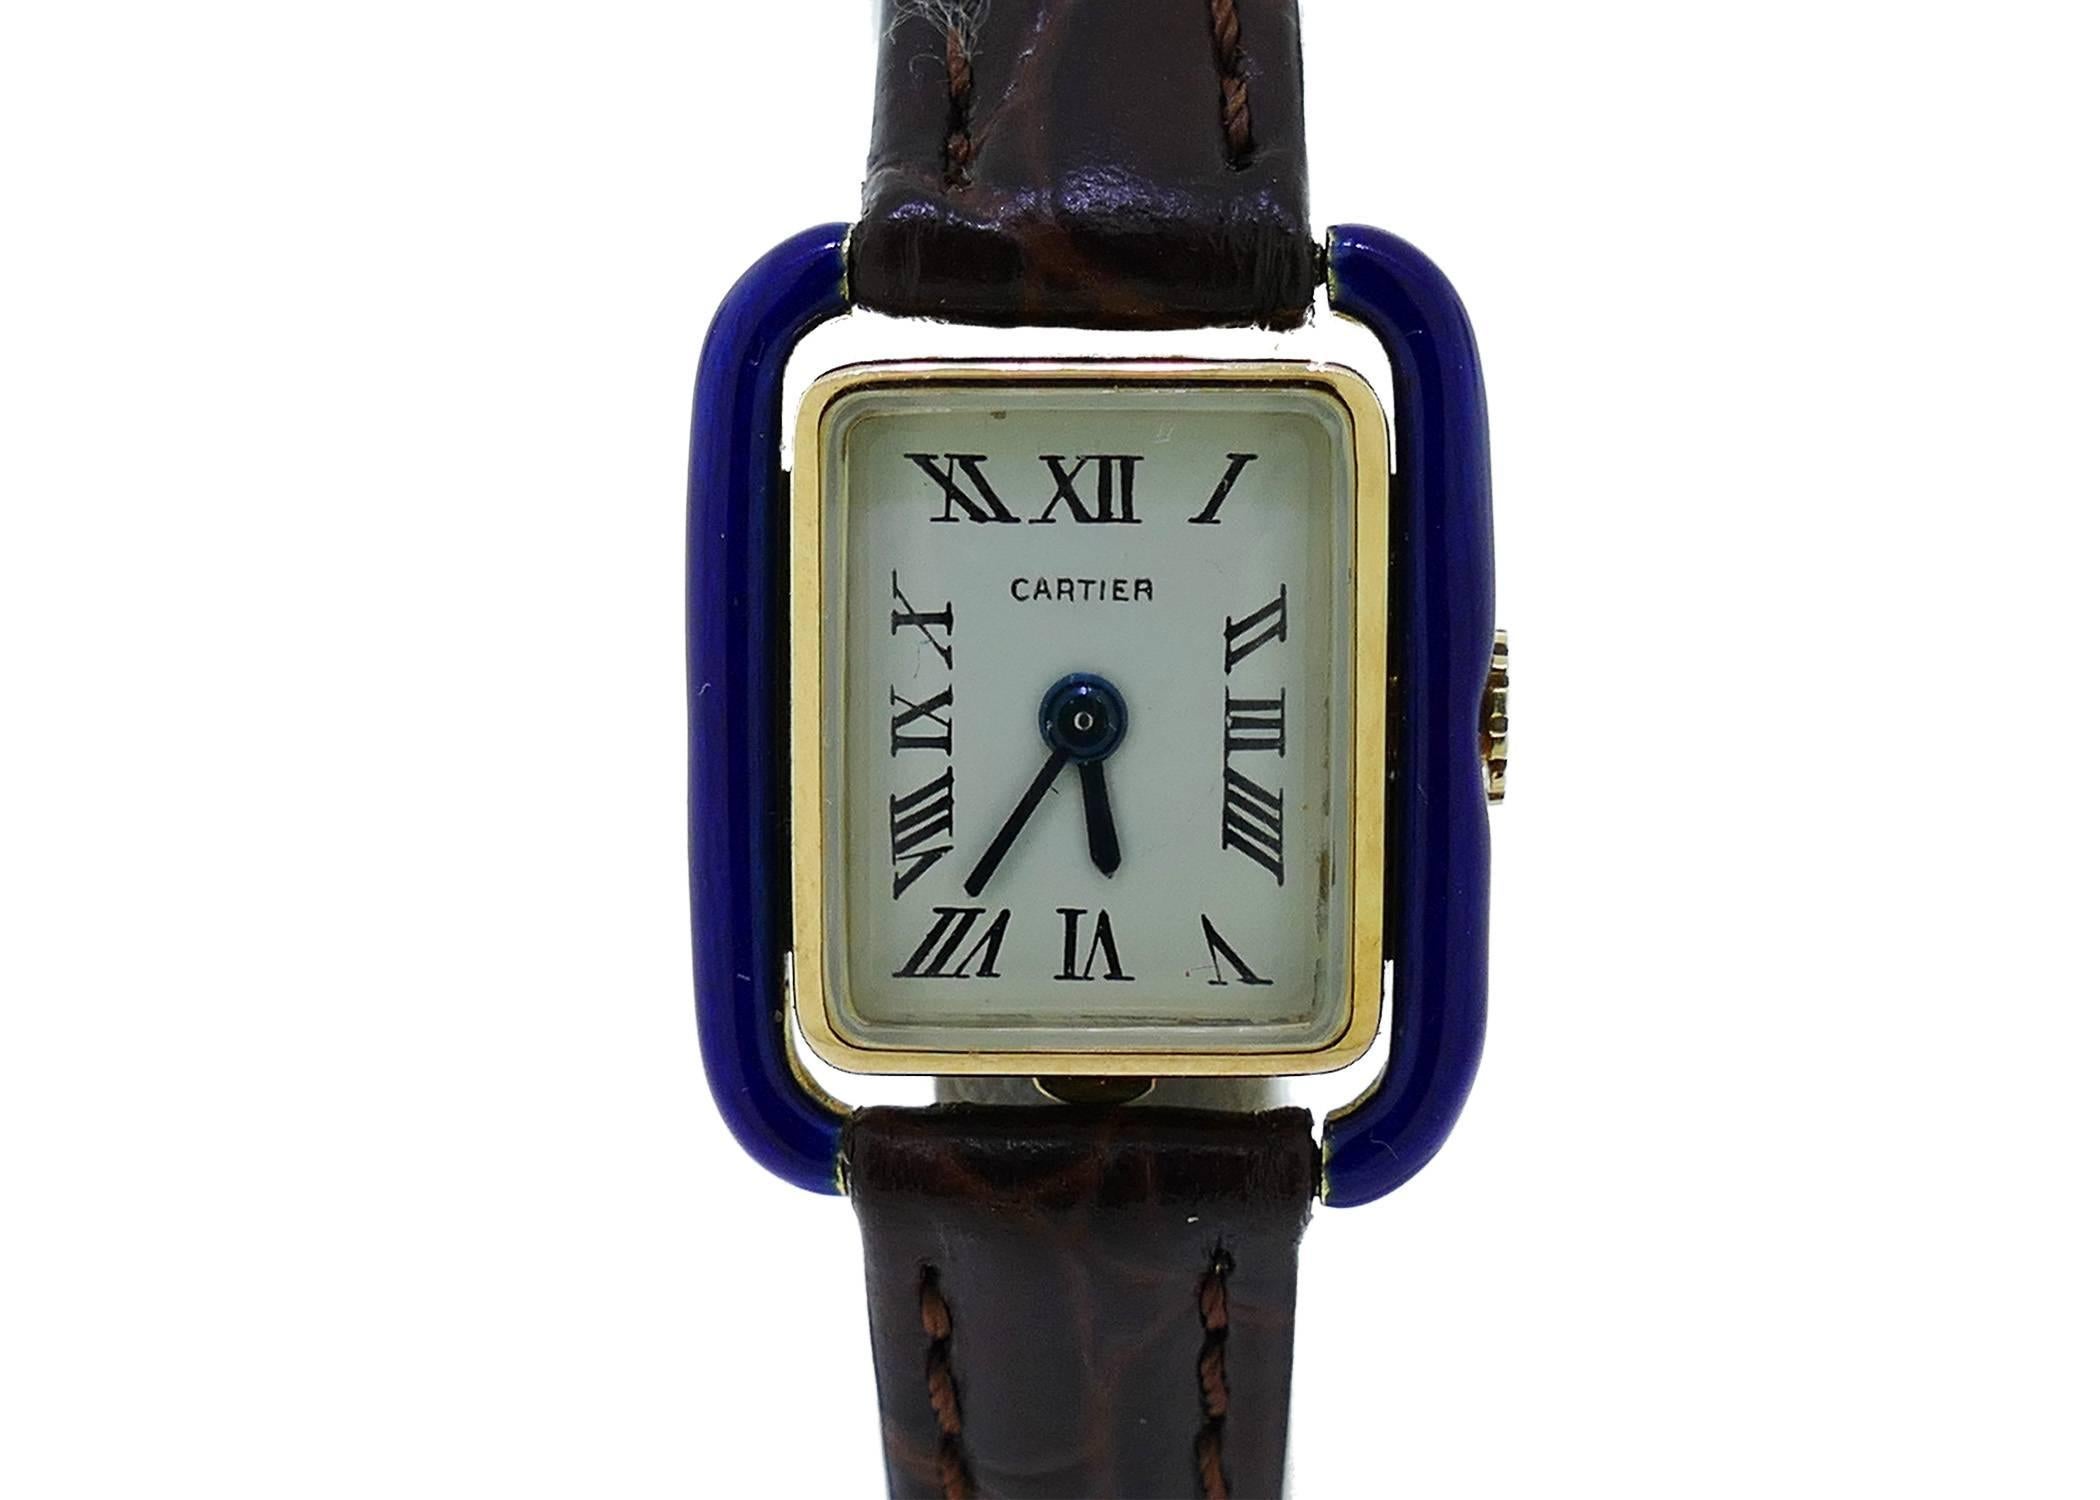 Offered For Sale is a Vintage Early Cartier Ladies (18x22mm) Rectangular 18k Yellow Gold Watch w/ Blue Enamel. The Watch is in Great Condition & Keeping Great Time, Movement is Operated by Mechanical Hand Winding. The Watch is on a Generic Strap &